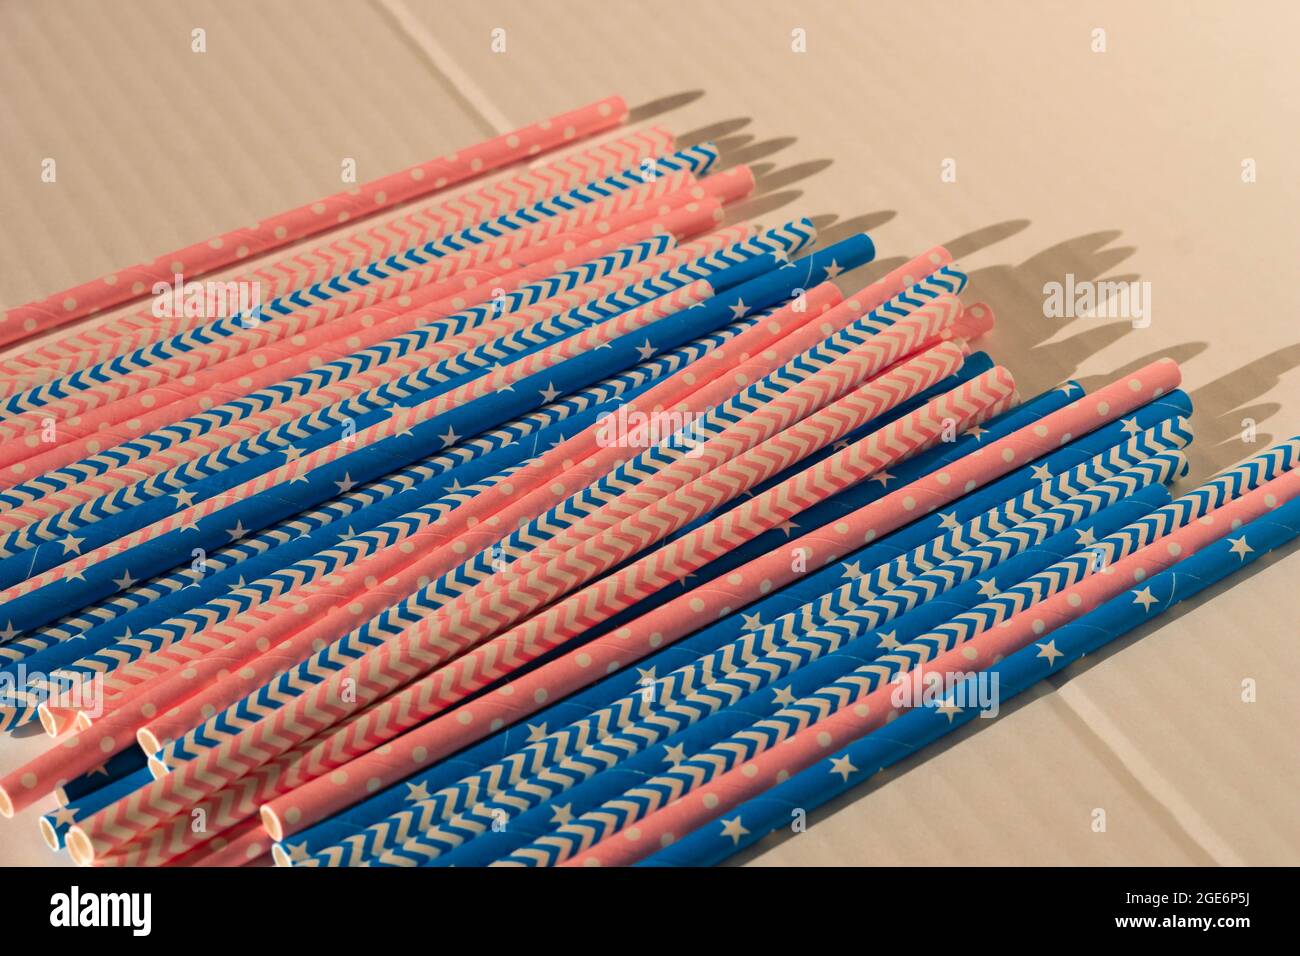 https://c8.alamy.com/comp/2GE6P5J/color-straws-for-gender-reveal-party-birth-child-baby-shower-concept-boy-or-girl-pink-and-blue-2GE6P5J.jpg